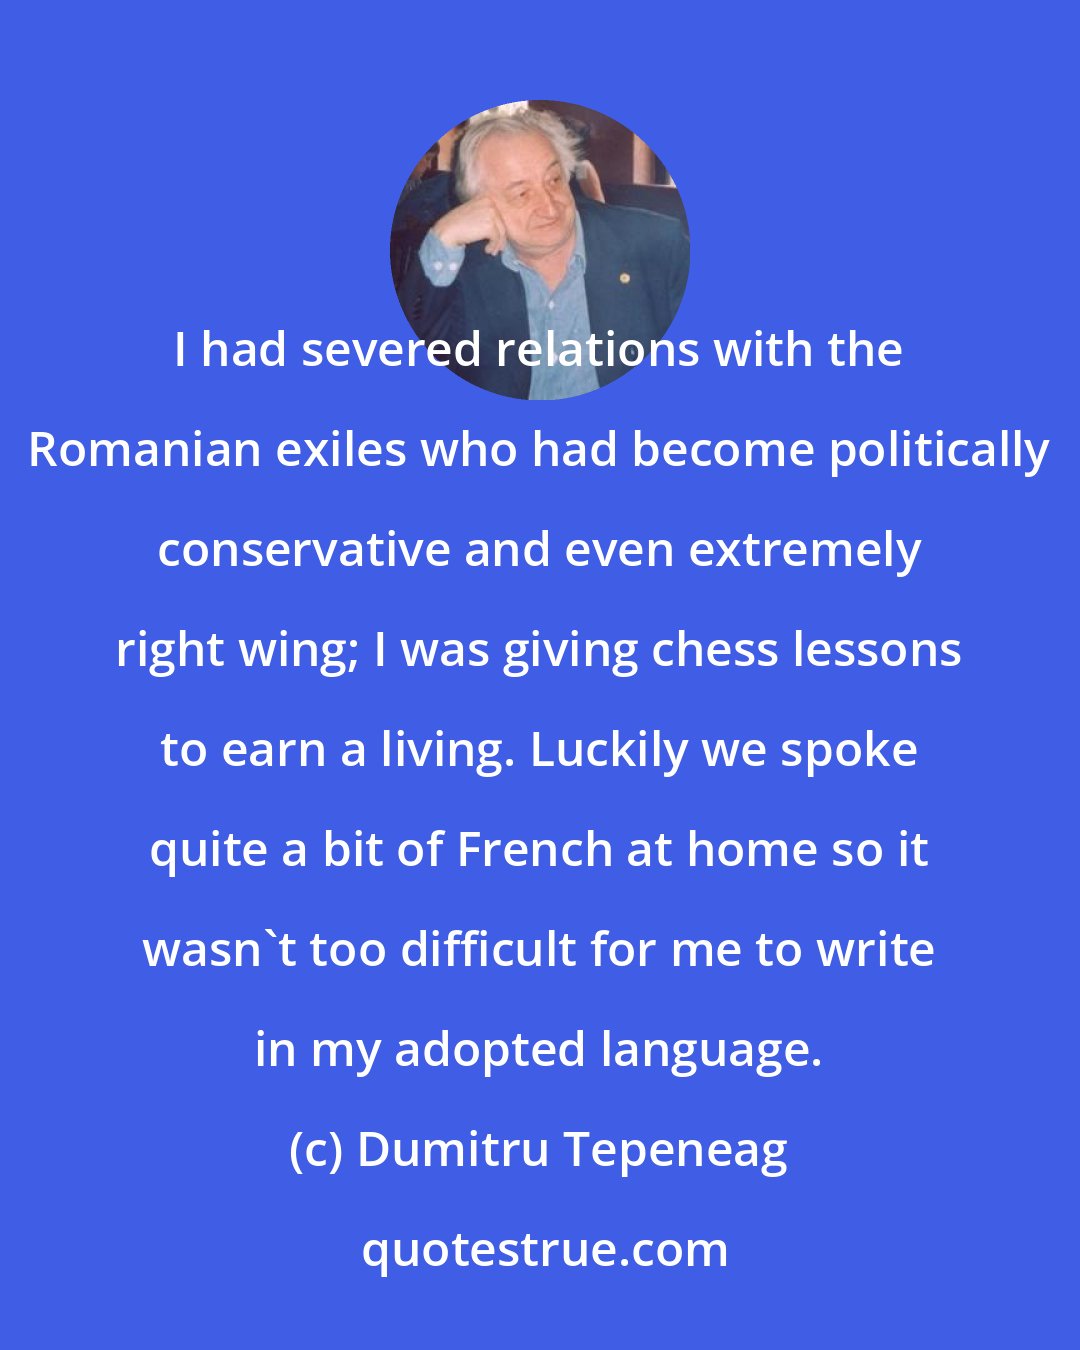 Dumitru Tepeneag: I had severed relations with the Romanian exiles who had become politically conservative and even extremely right wing; I was giving chess lessons to earn a living. Luckily we spoke quite a bit of French at home so it wasn't too difficult for me to write in my adopted language.